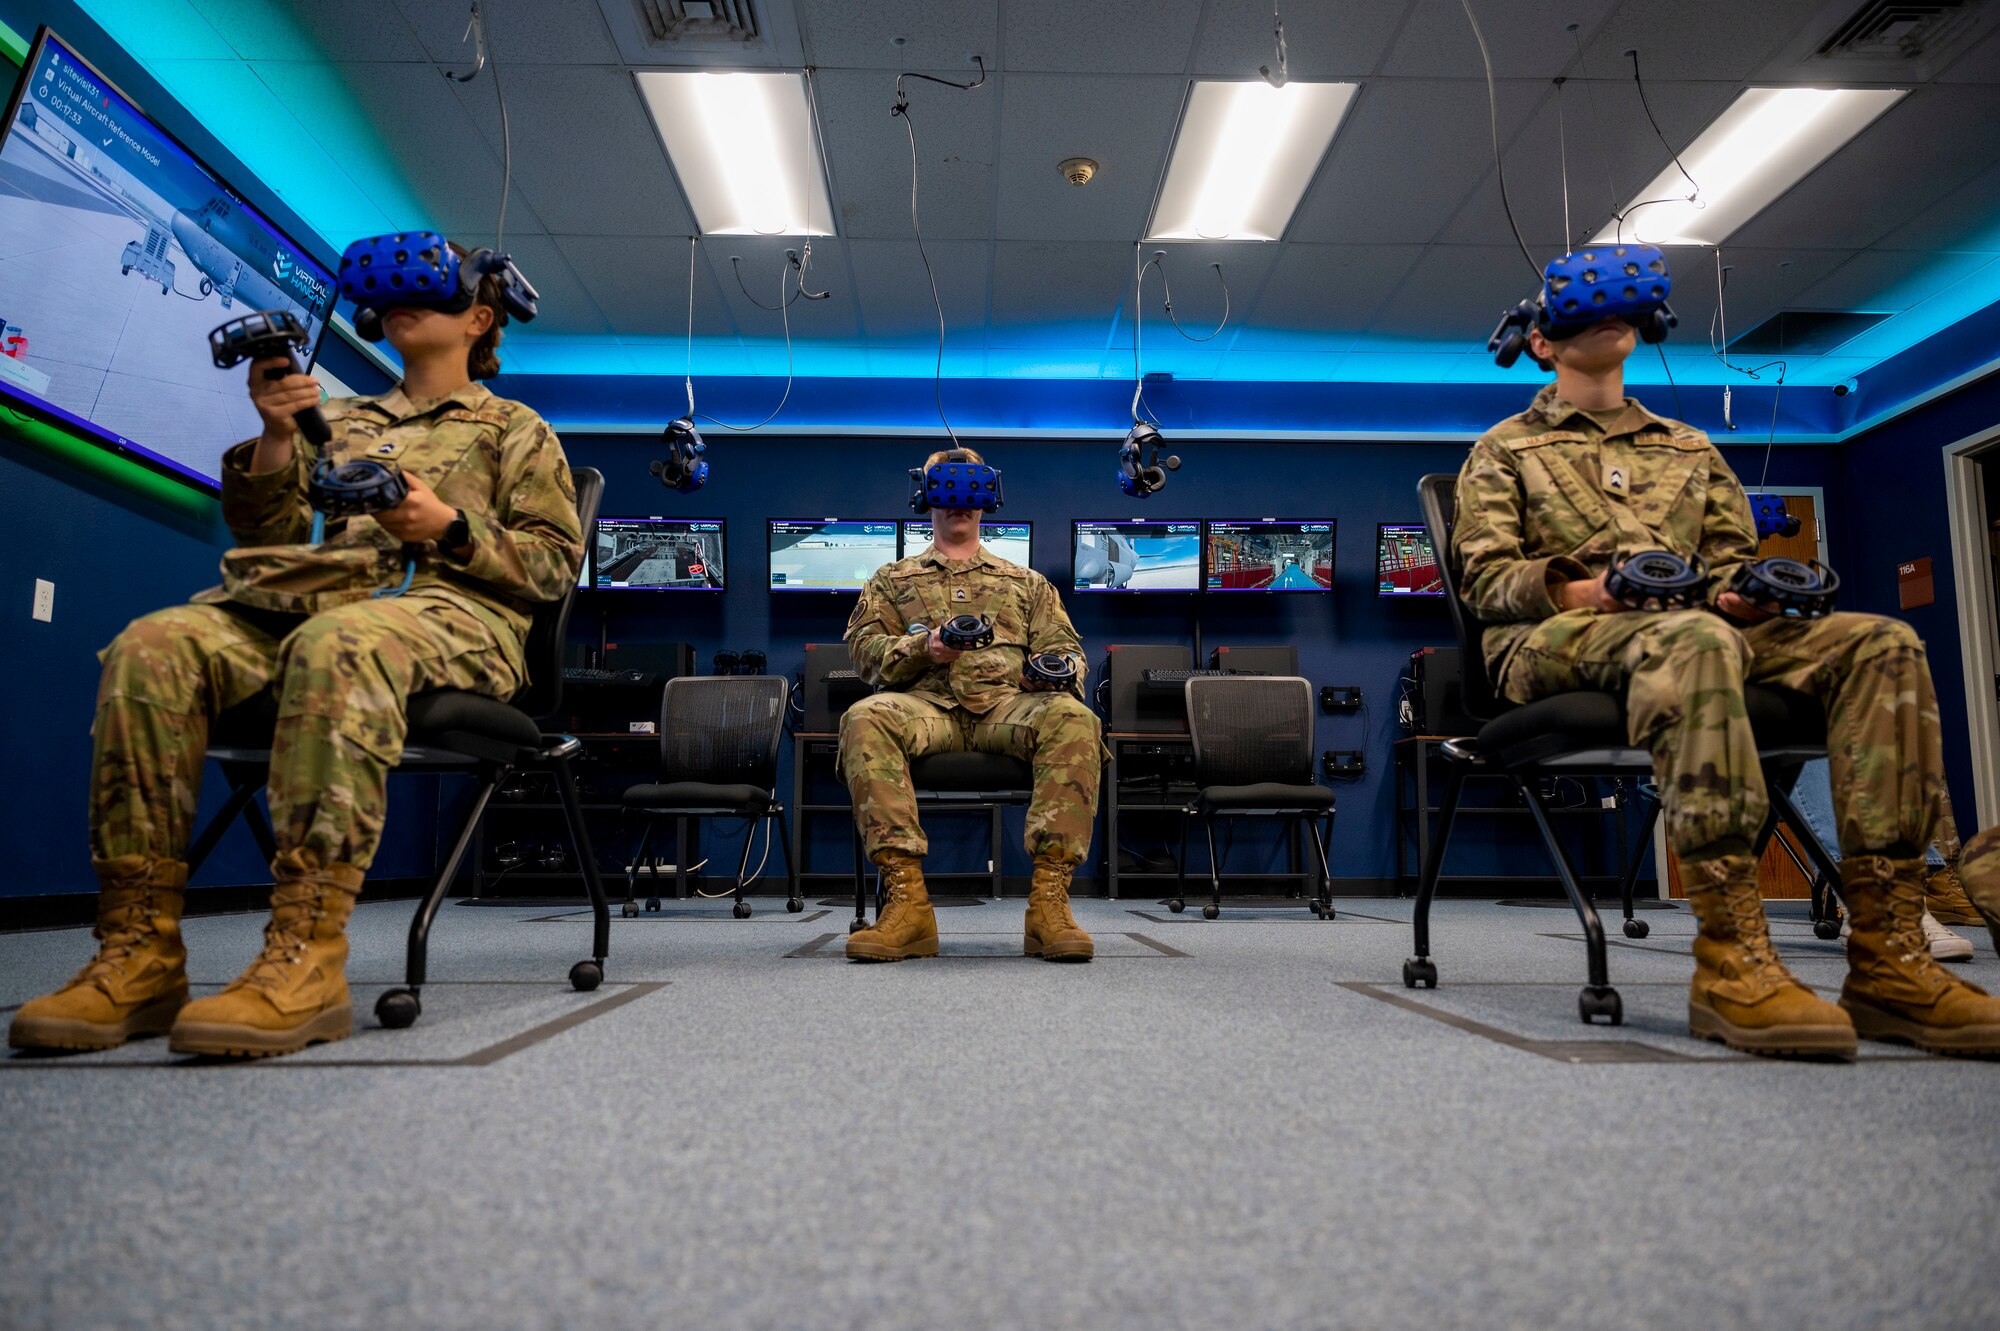 Students from three Texas universities use virtual reality equipment while on a tour at Dyess Air Force Base.